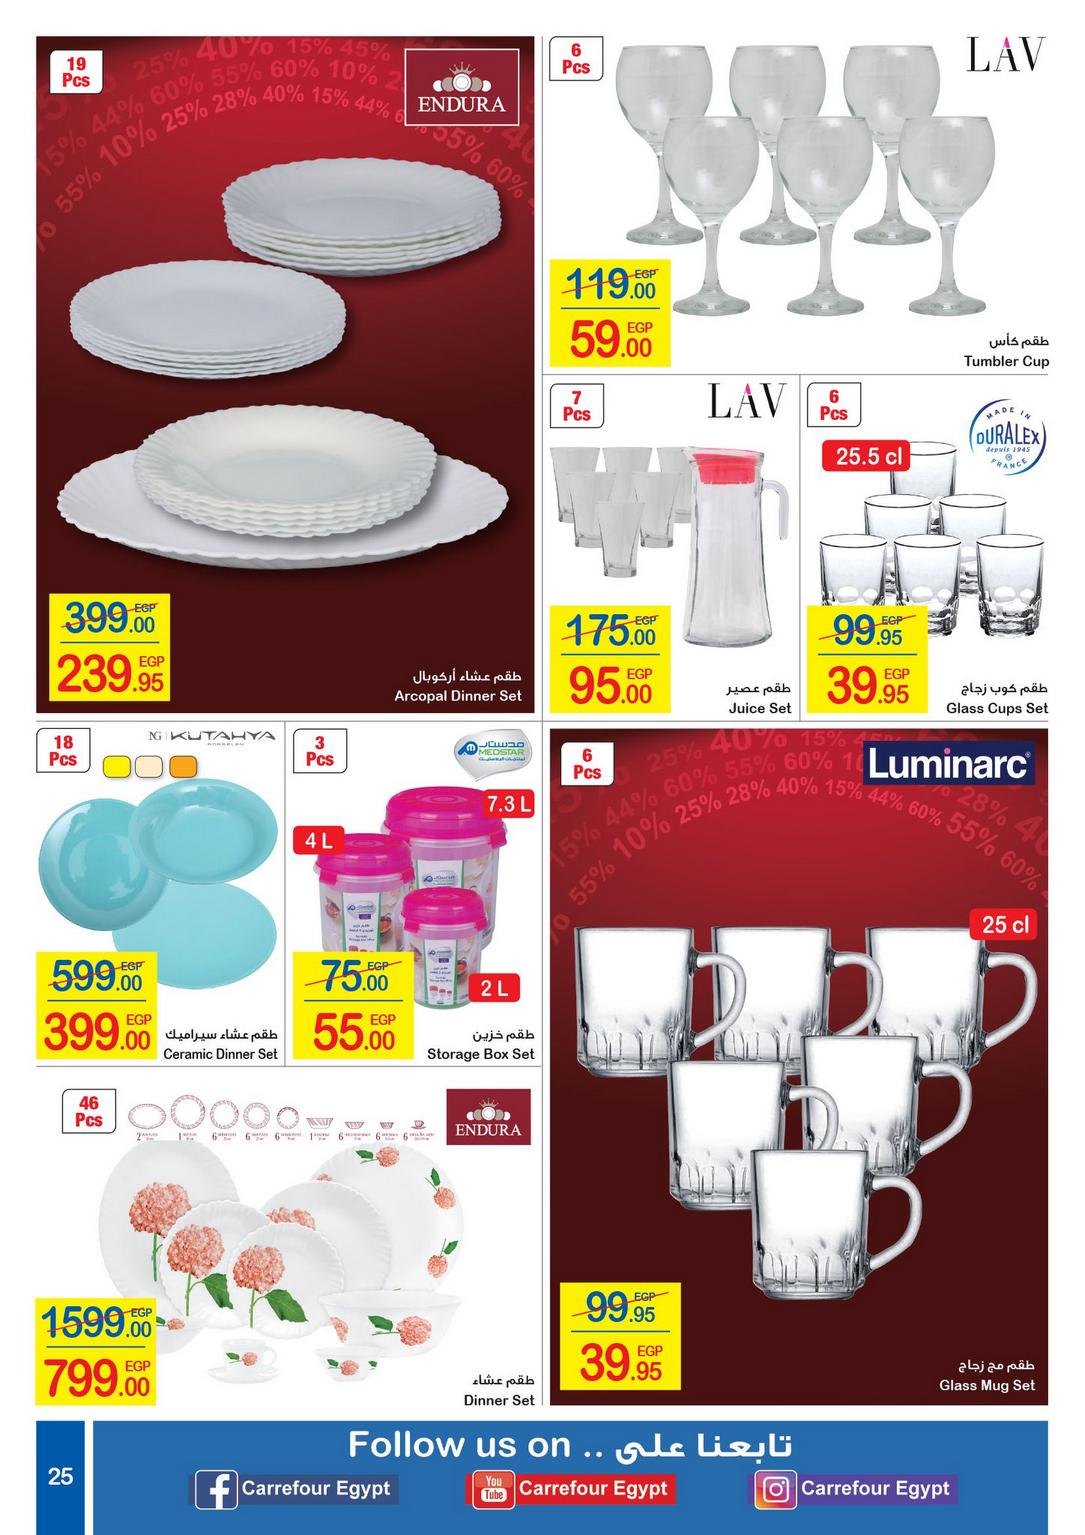 Carrefour Deals from 1/1 till 14/1 | Carrefour Egypt 26